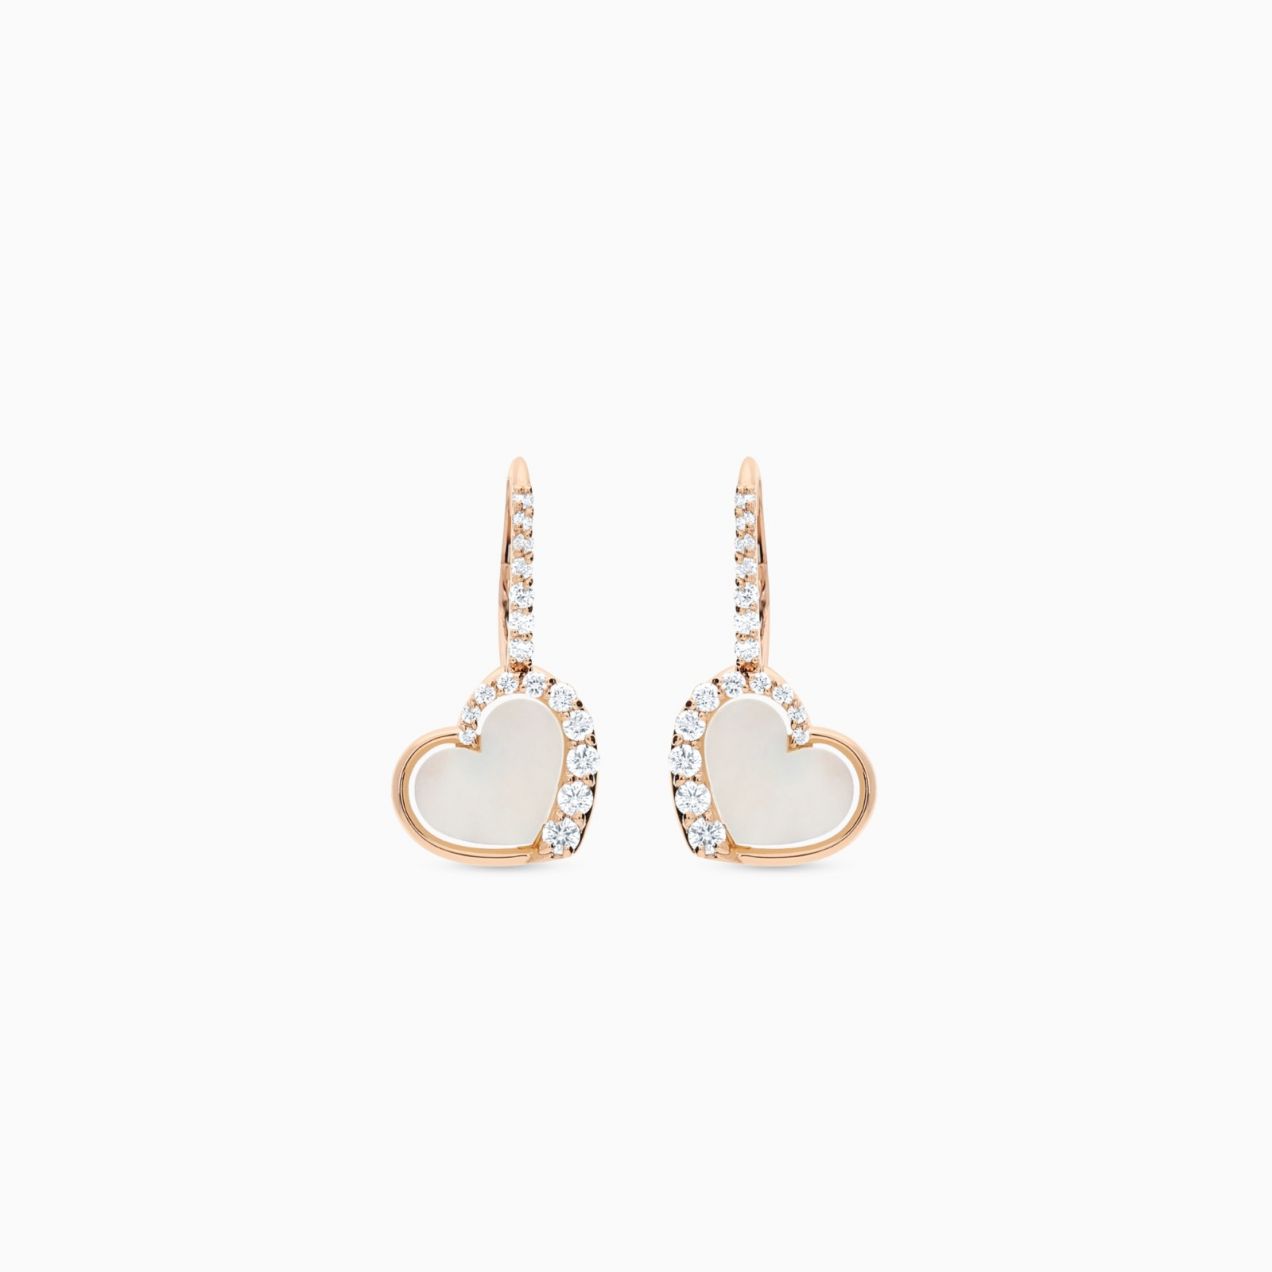 Heart-shaped earrings in rose gold with mother of pearl and diamonds